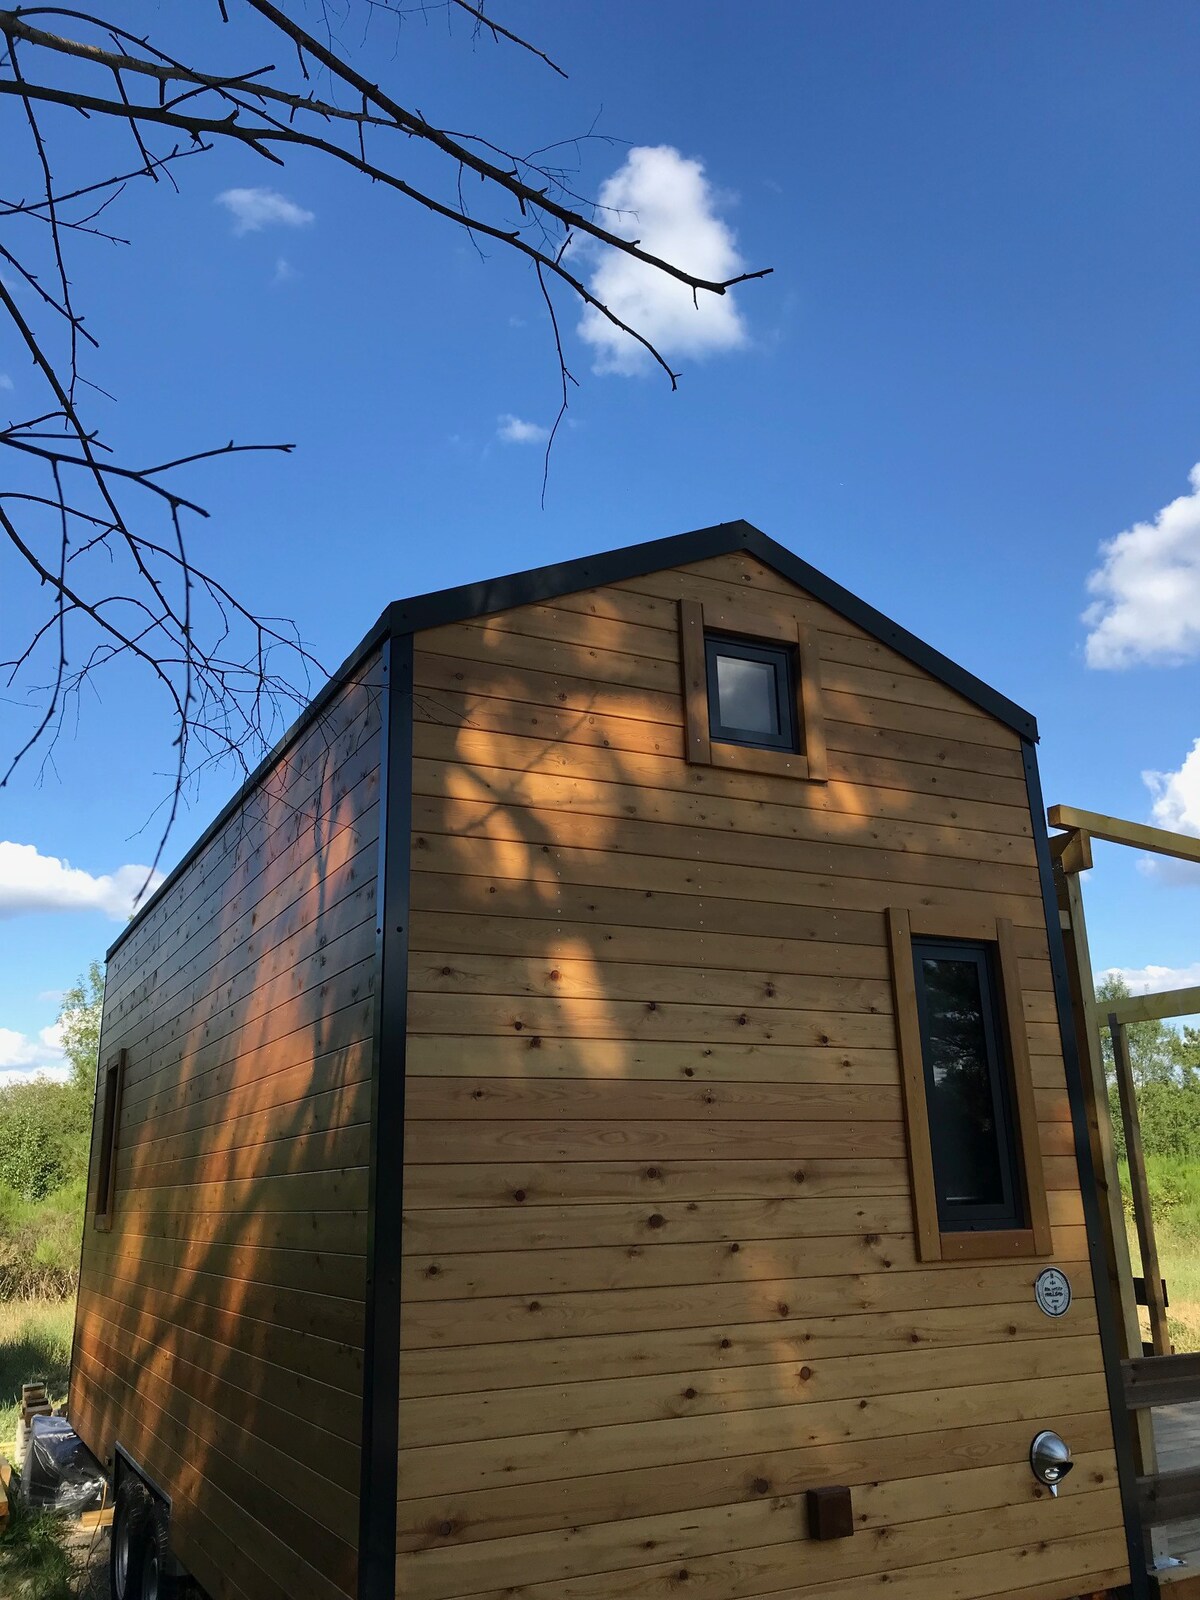 Atypical Tiny House - Beauval and Châteaux Zoo